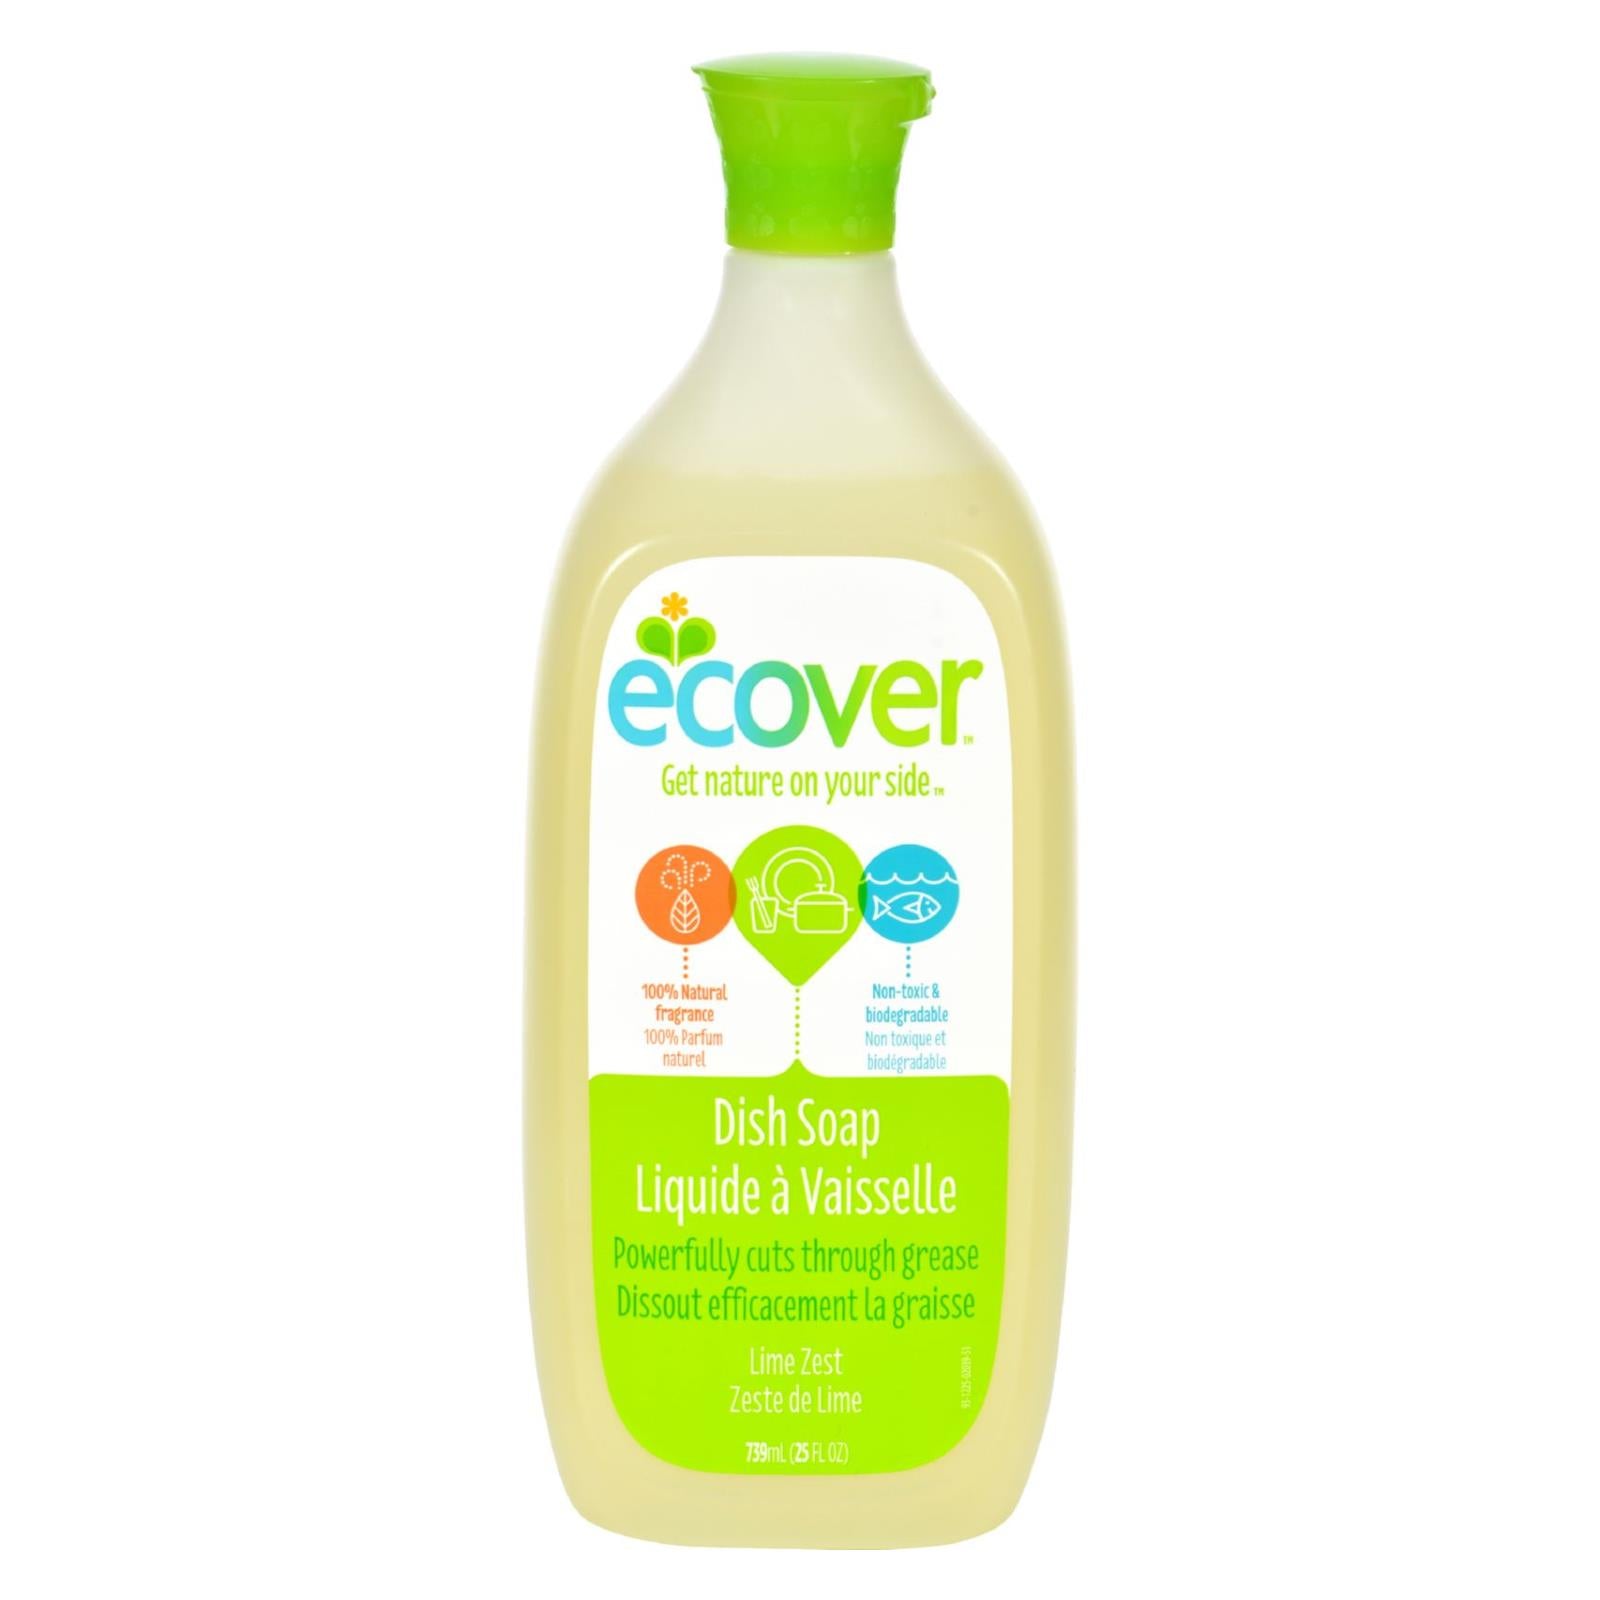 Ecover Liquid Dish Soap - Lime Zest - 25 Oz - Case Of 6 - Whole Green Foods